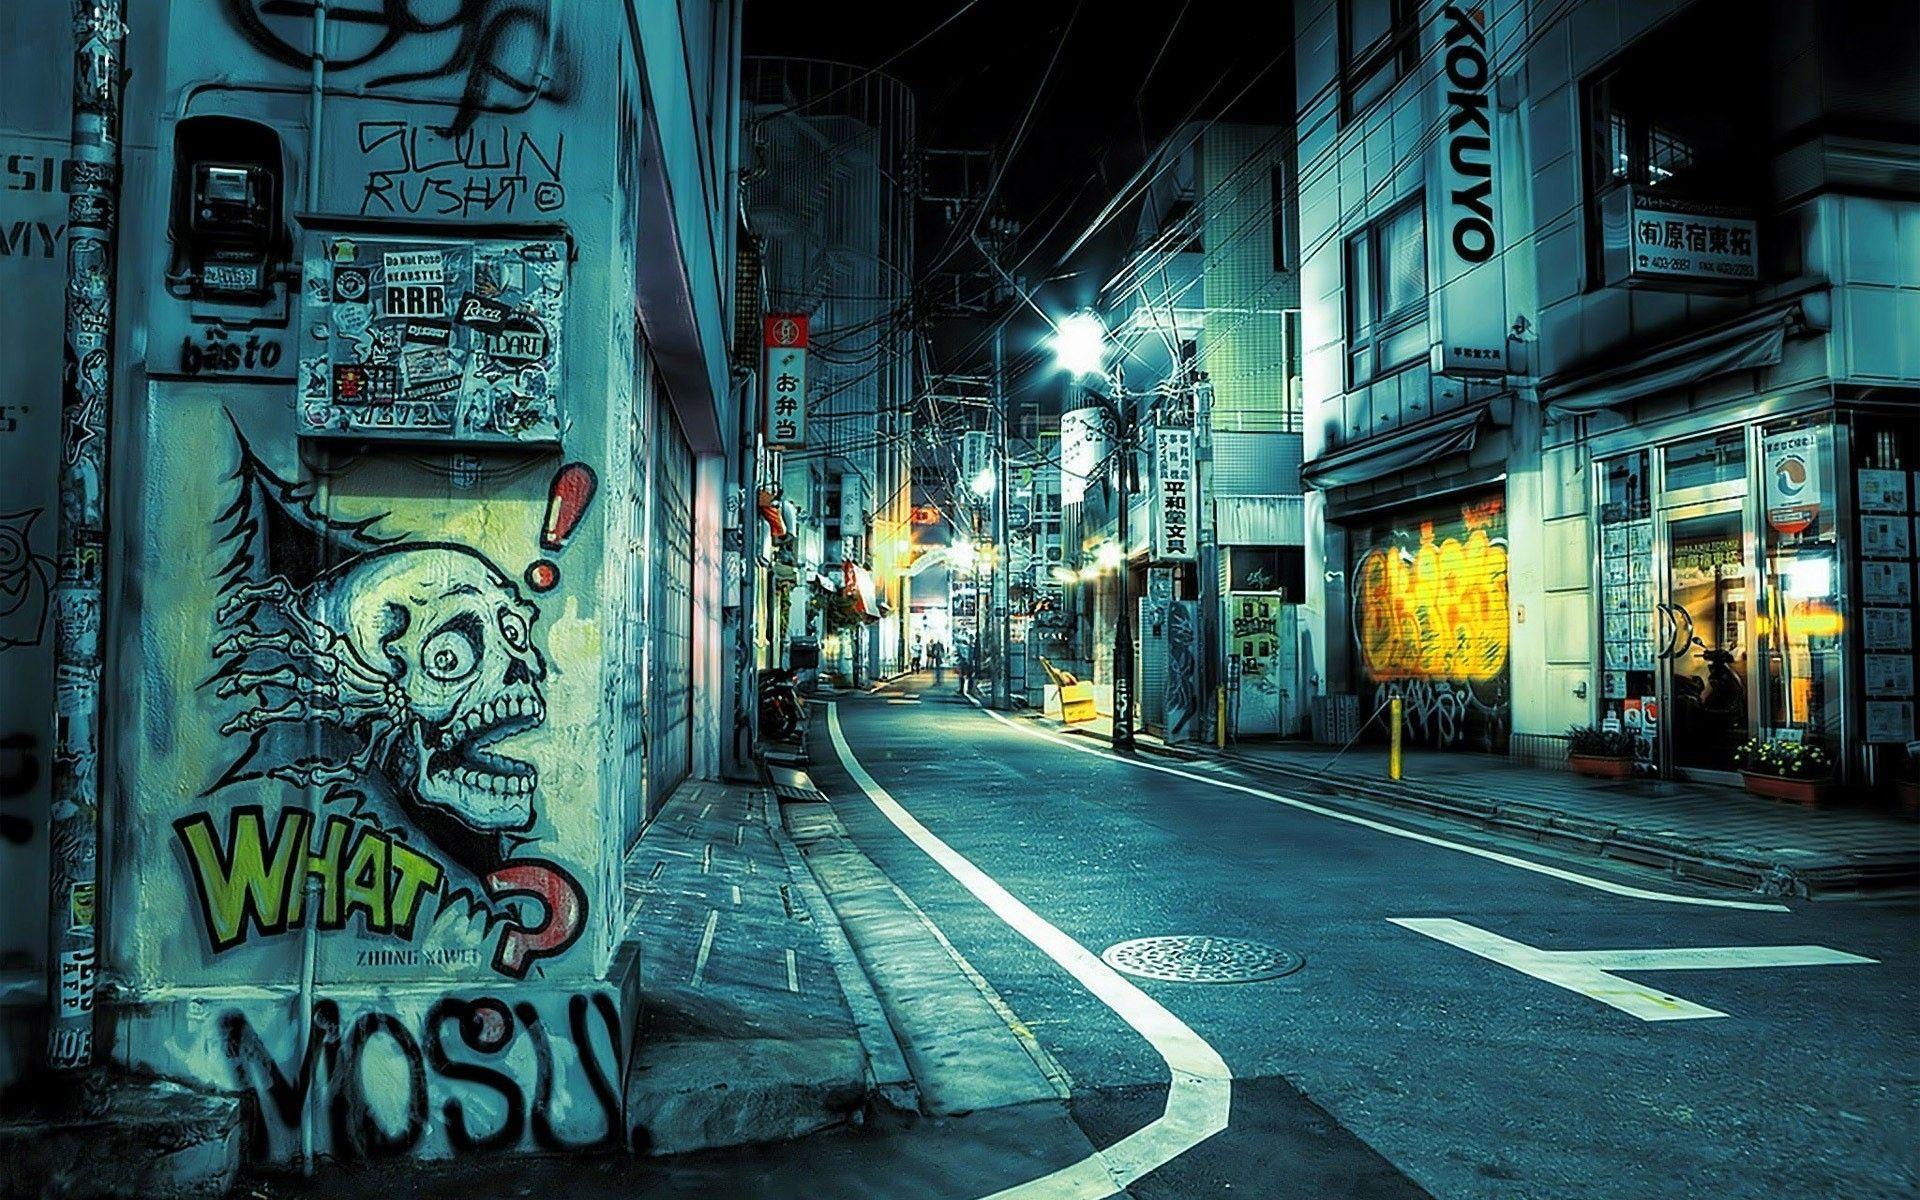 Best image about City streets. Cyberpunk, Nice